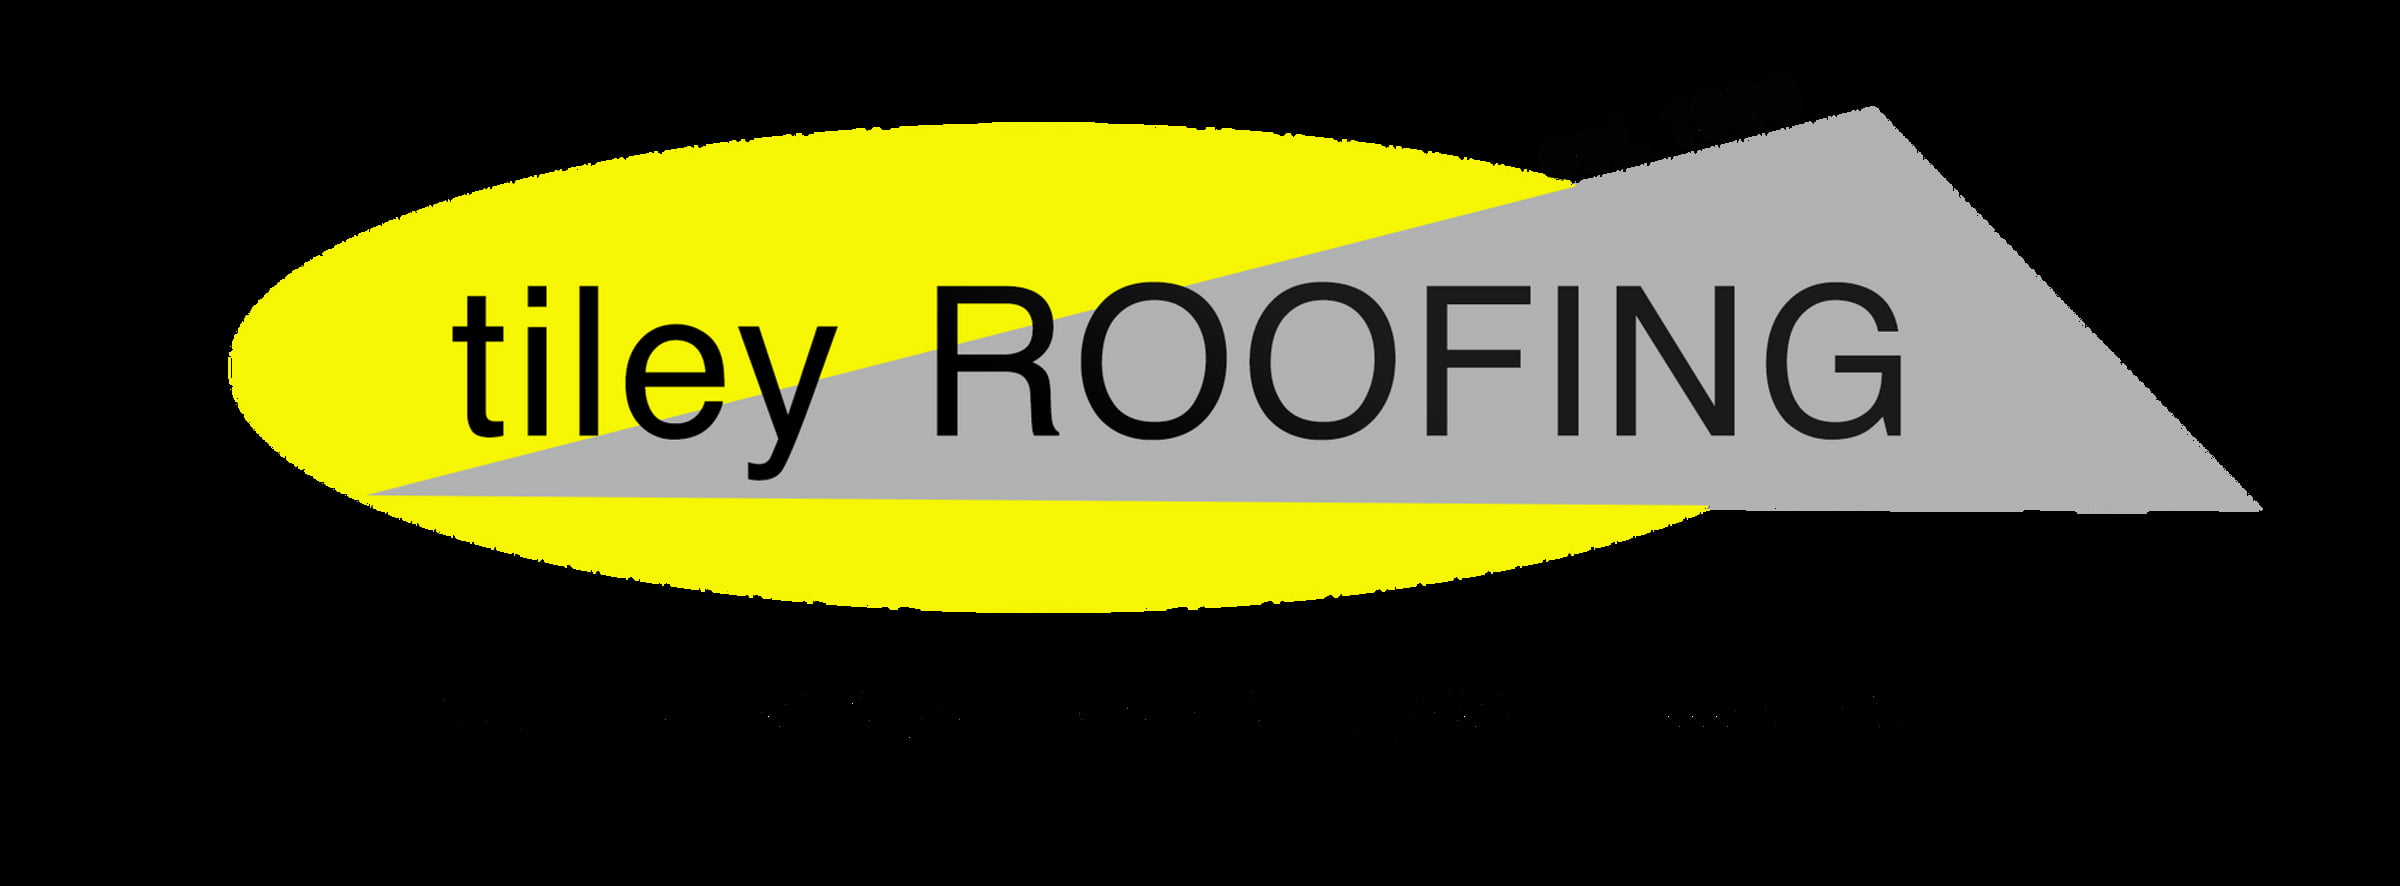 Tiley Roofing Inc roofing company in Colorado